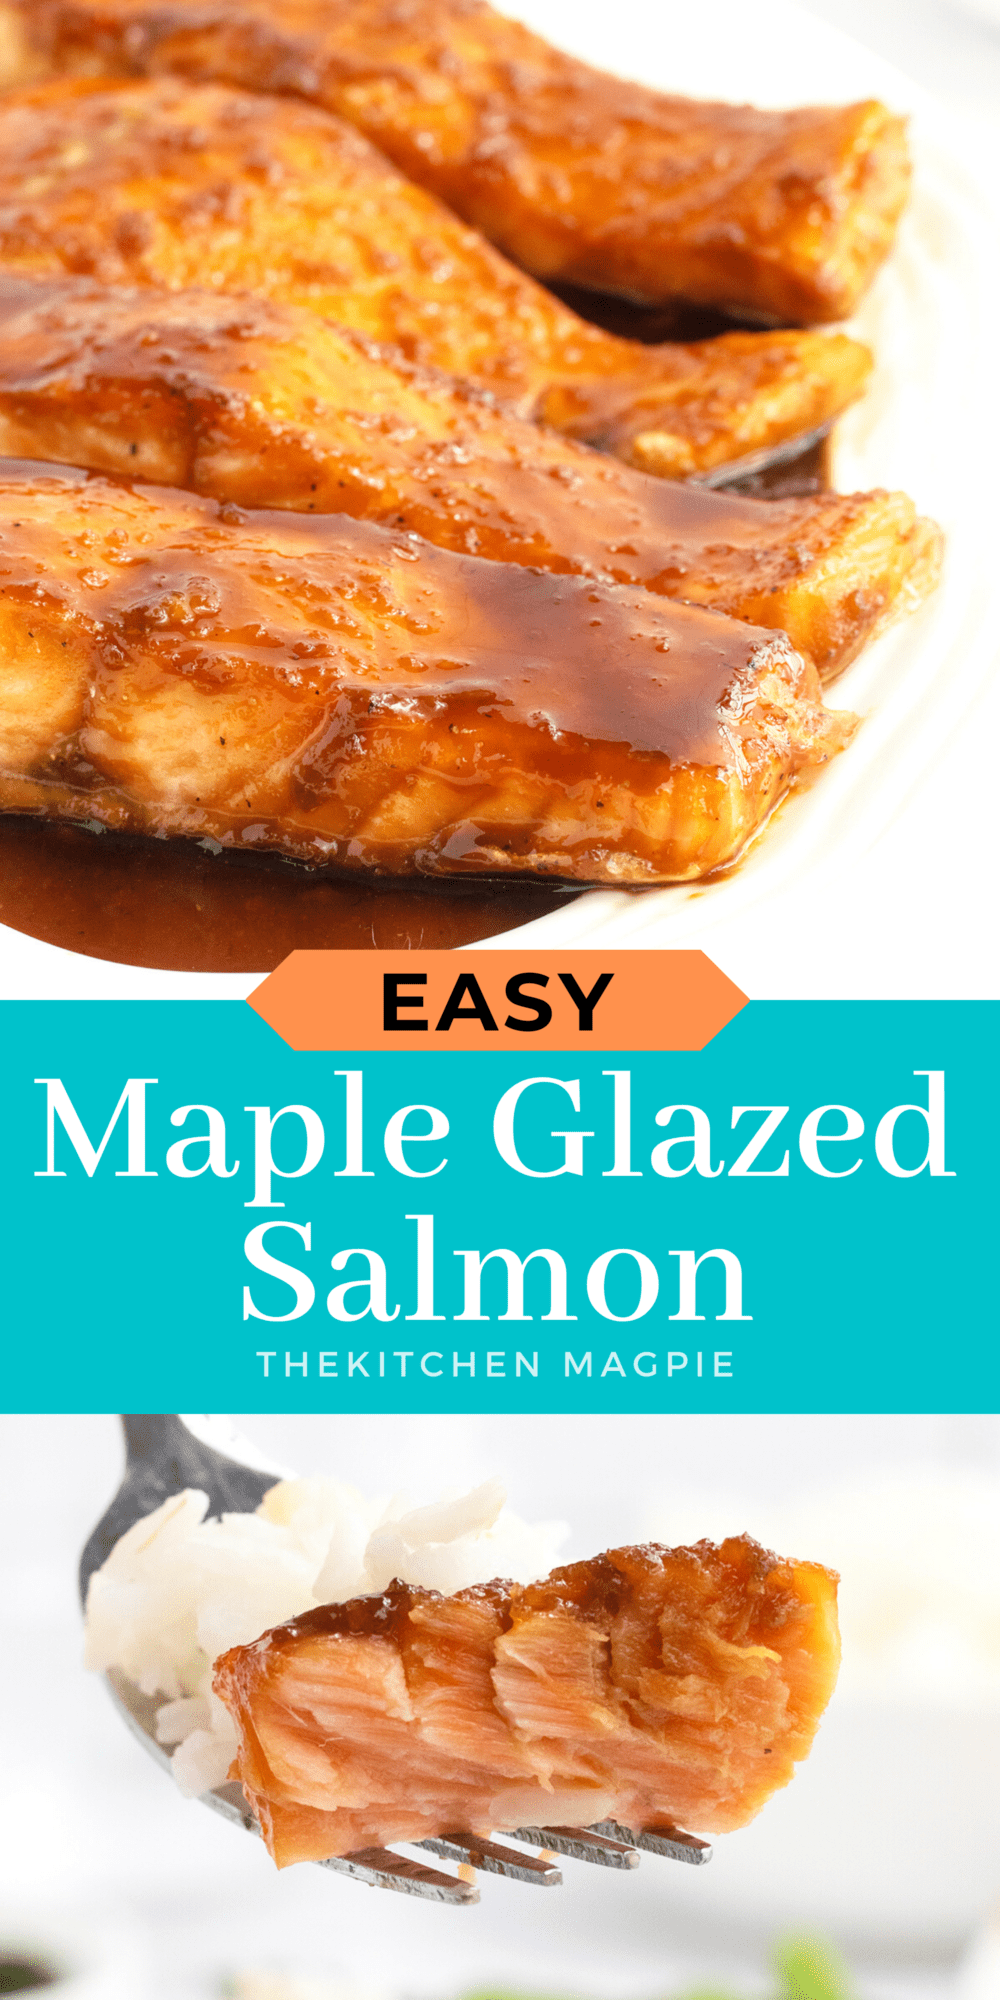  This recipe makes for a super intensely flavored, sweet, and sticky salmon that works perfect as a weeknight meal.